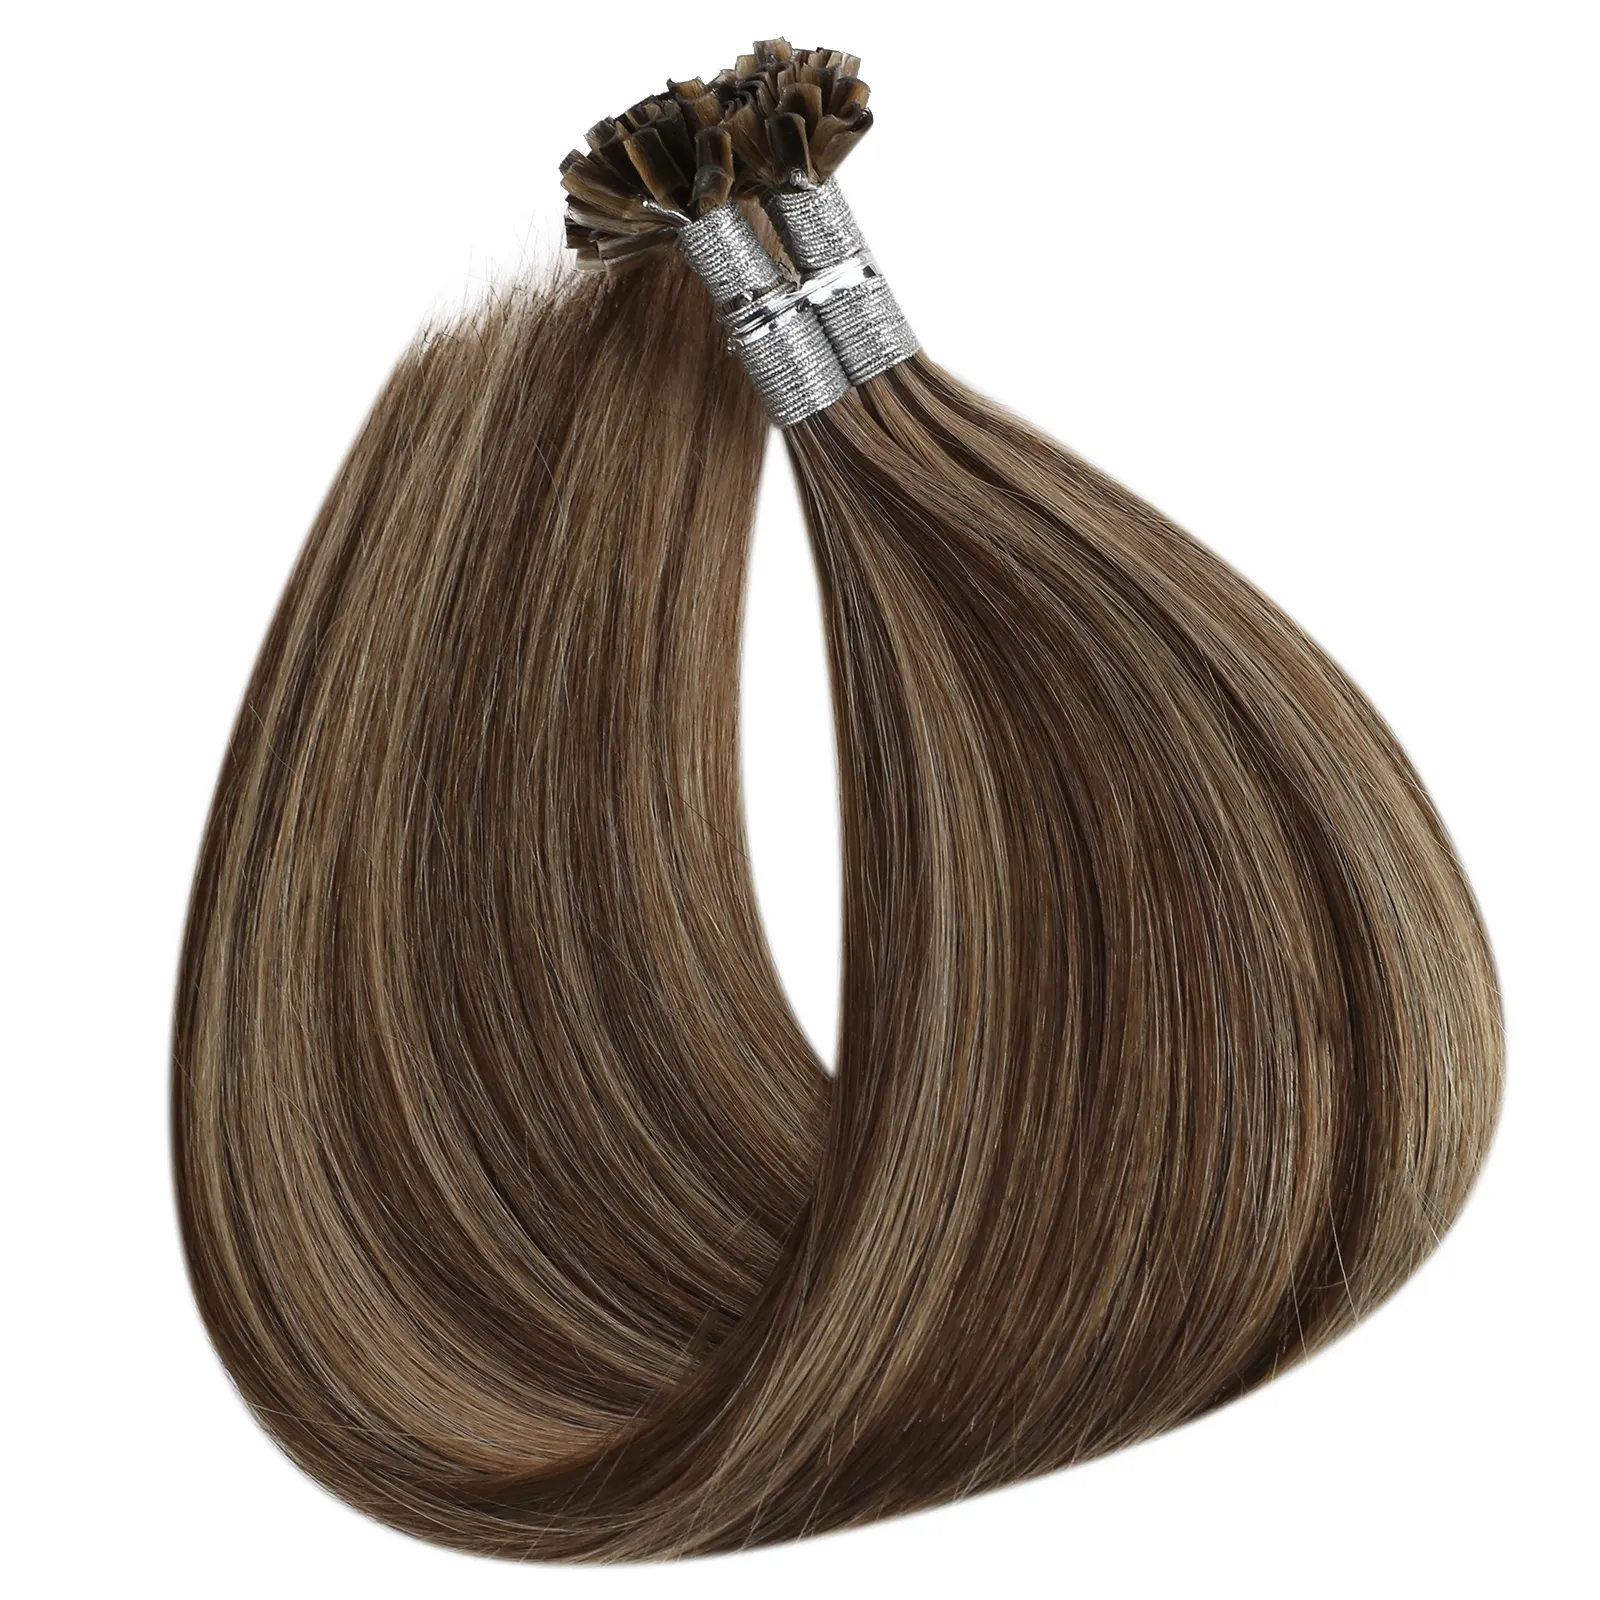 Full Shine 14-22 inches Straight Beauty U Tip Hair Extensions